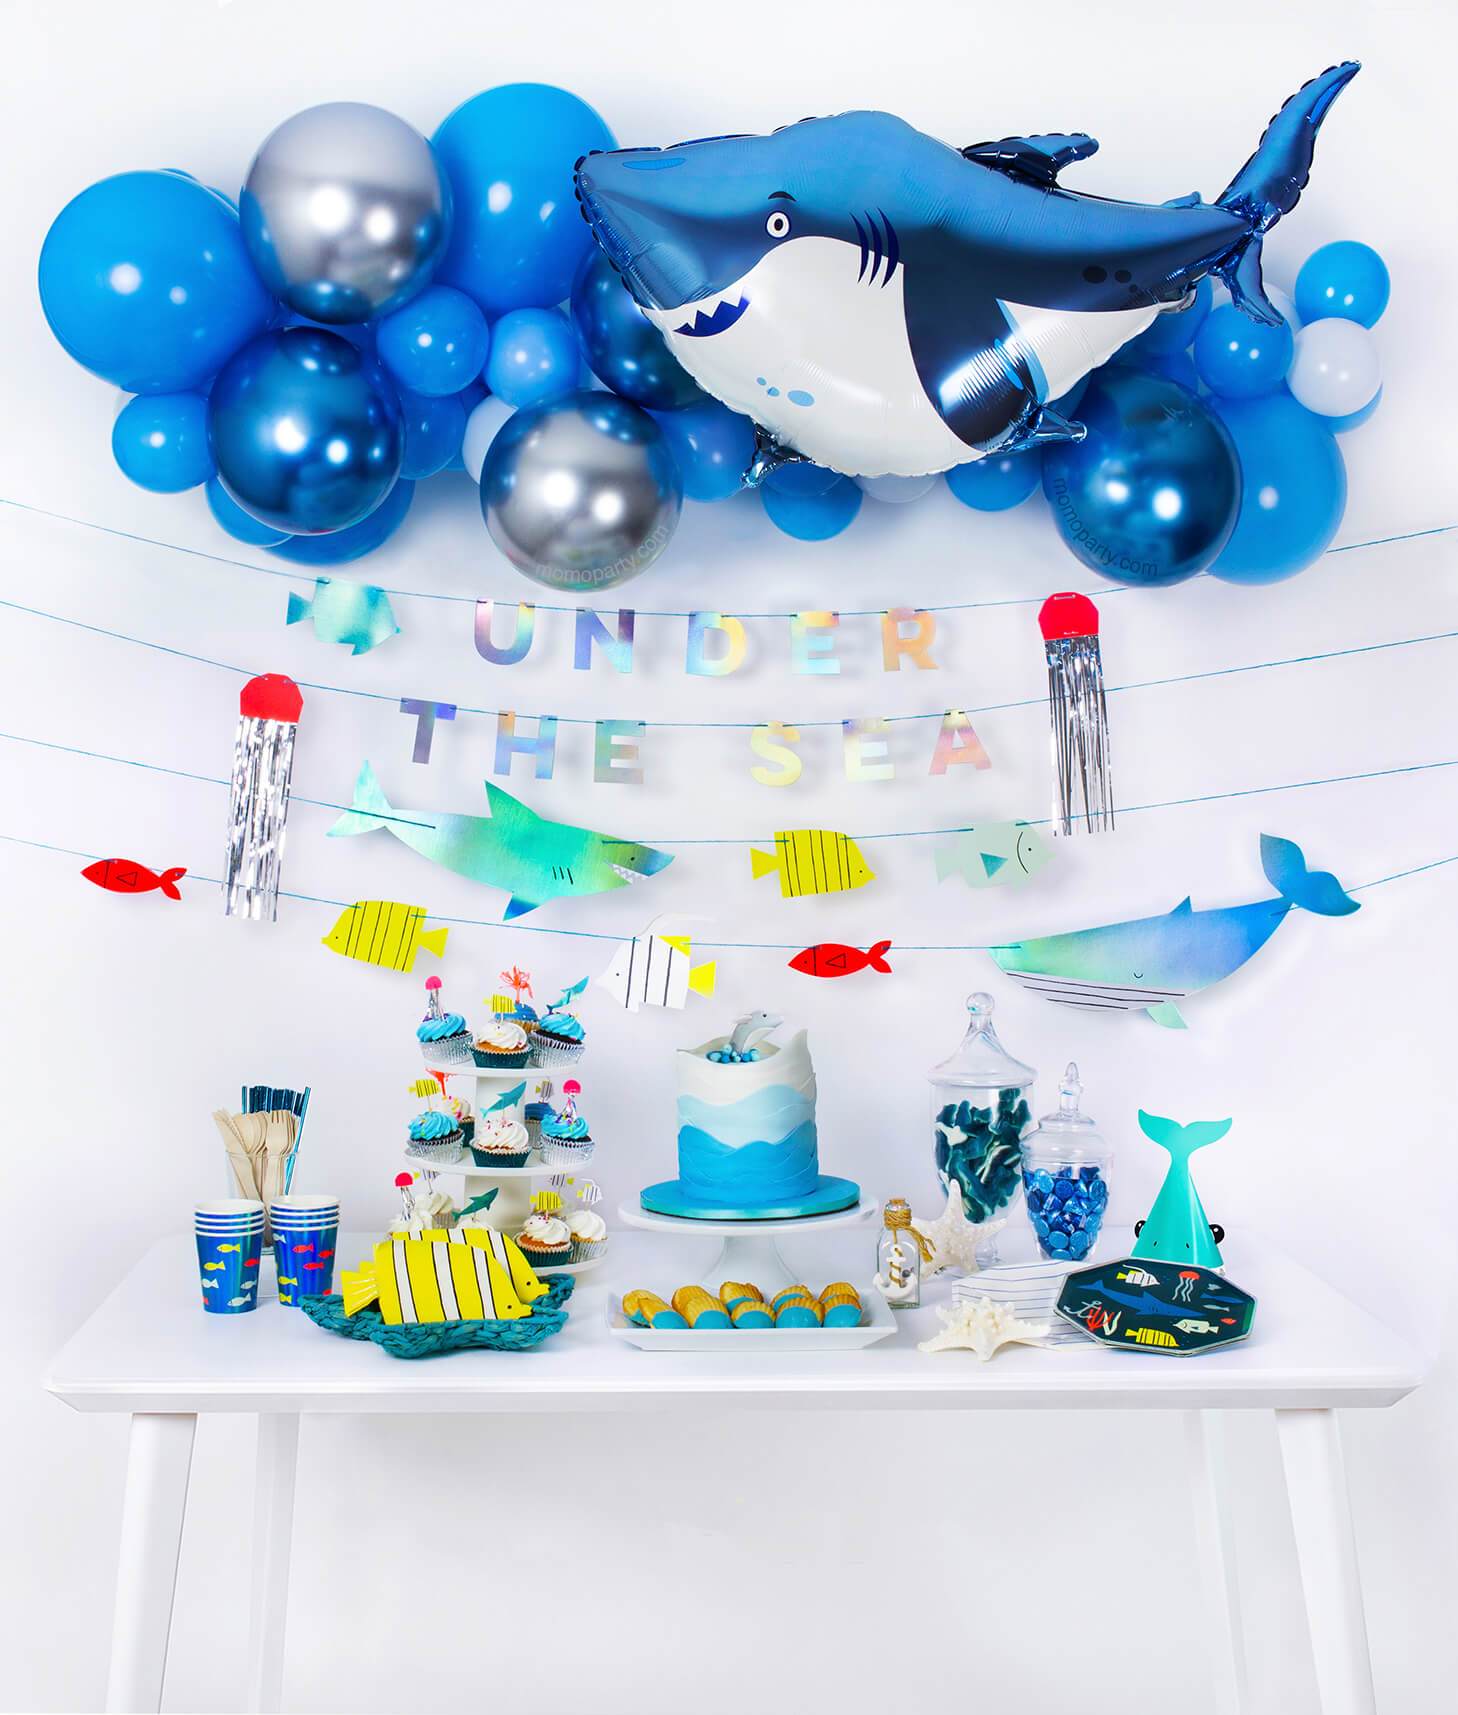 Momo Party Box of under the sea shark themed birthday party idea with balloon garland, shark foil balloon, Under the sea garland as decoration and fish graphic paper cups, fish die-cut napkins, shark party hats, plates and cupcakes as table set up